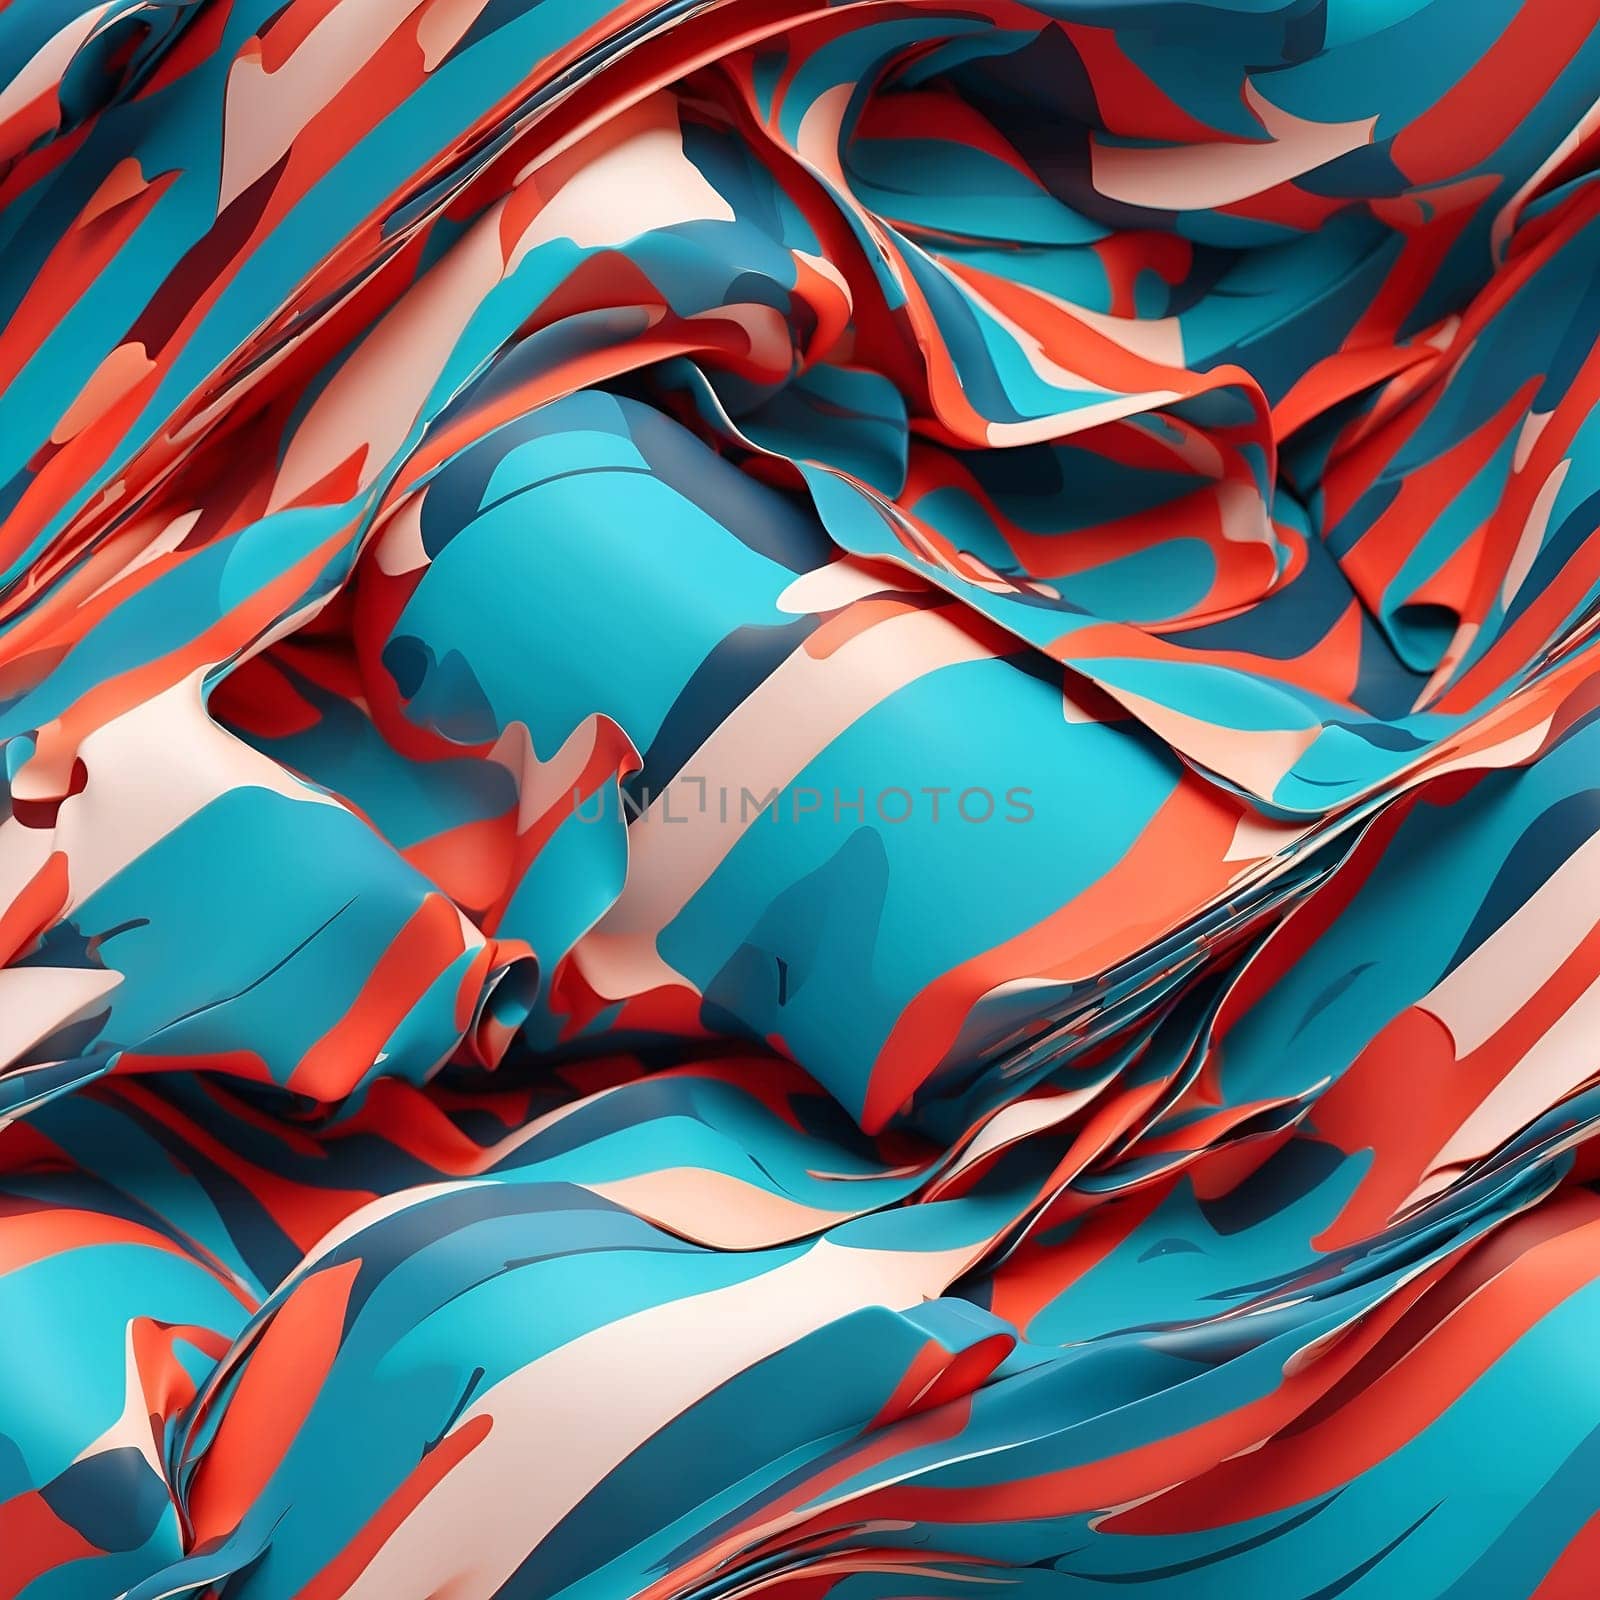 A seamless pattern of fabric showcasing wavy lines in the colors blue, red, and white.